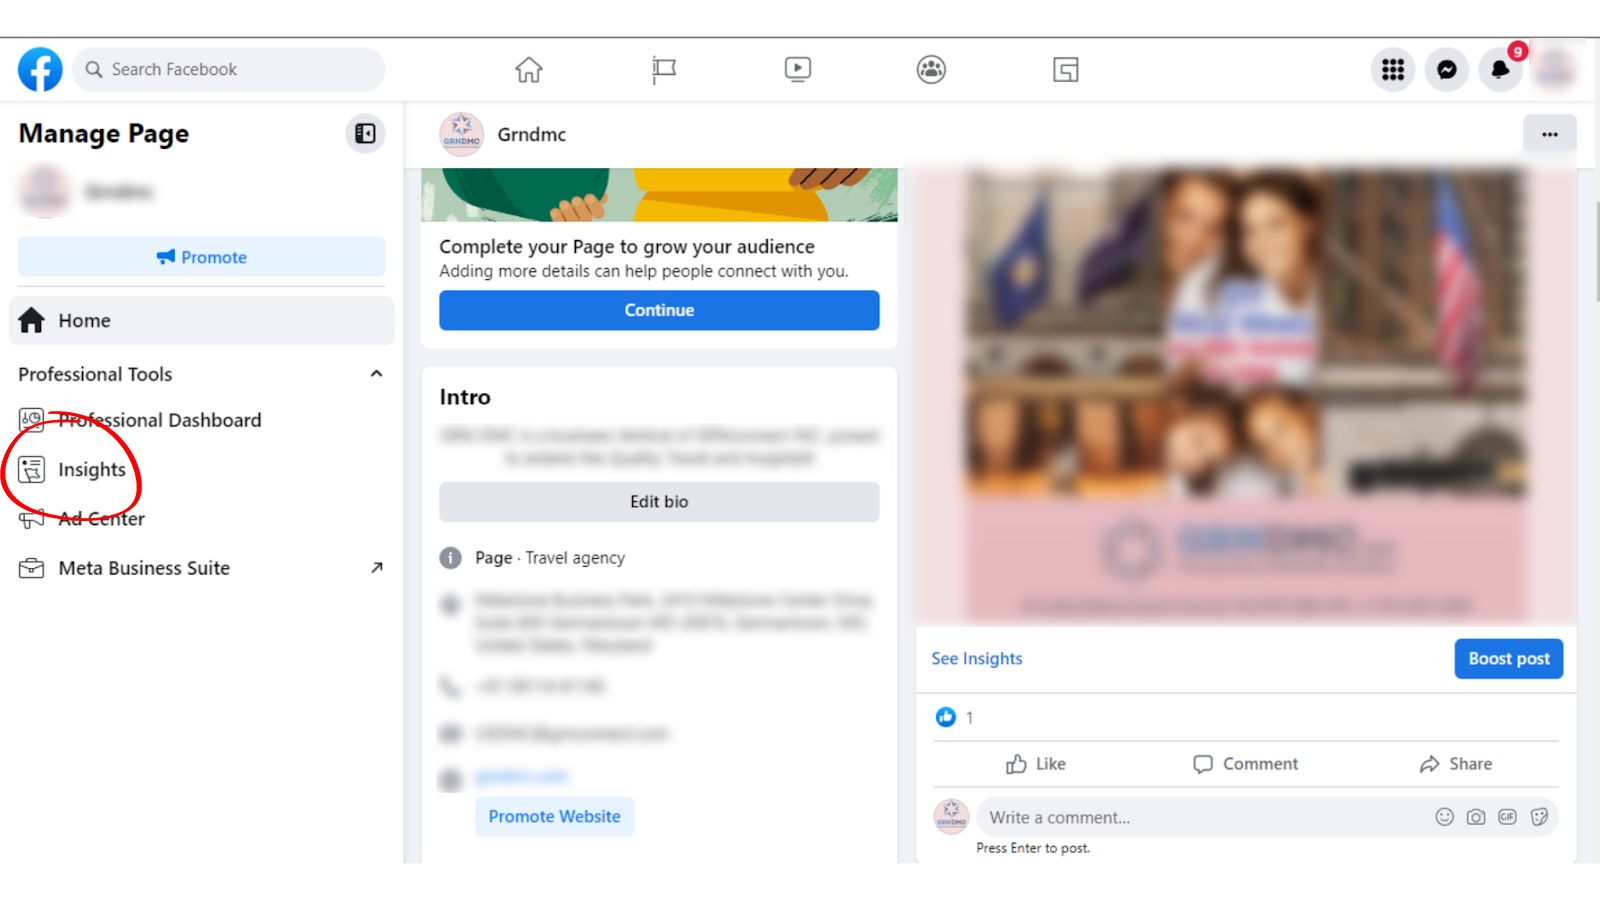 A screenshot showing access to Facebook pages